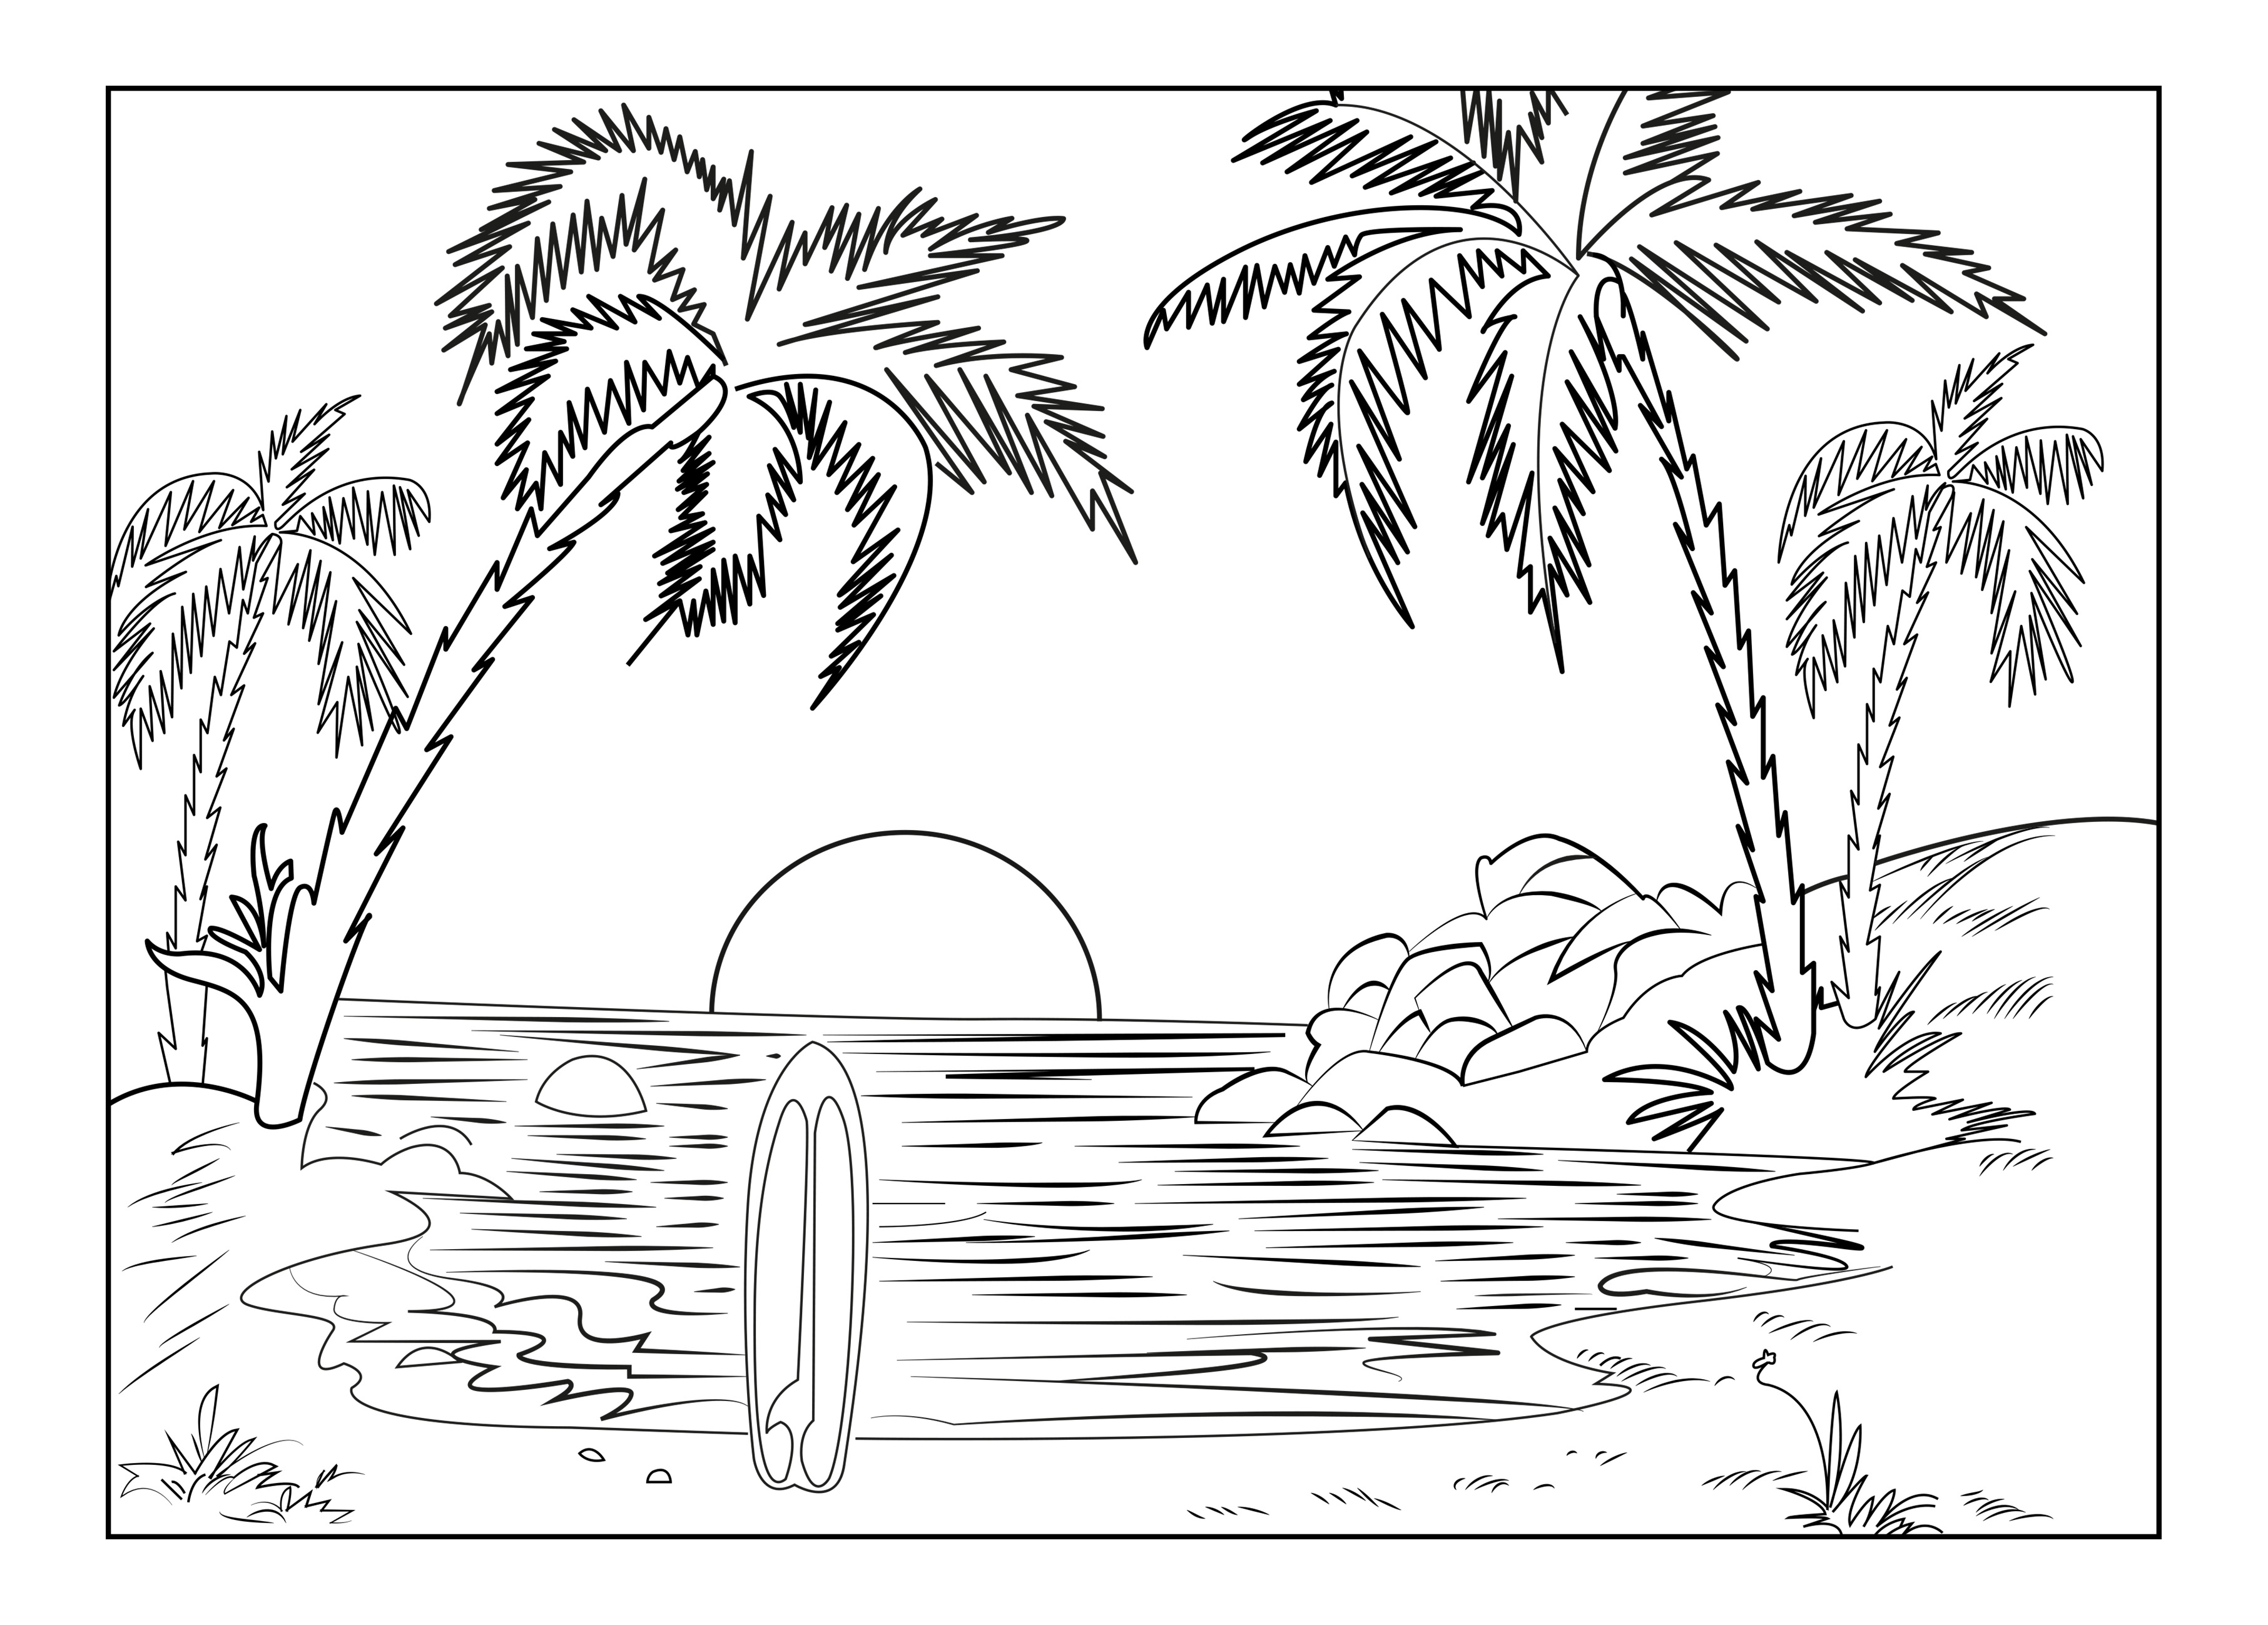 Landscapes - Coloring Pages for Adults